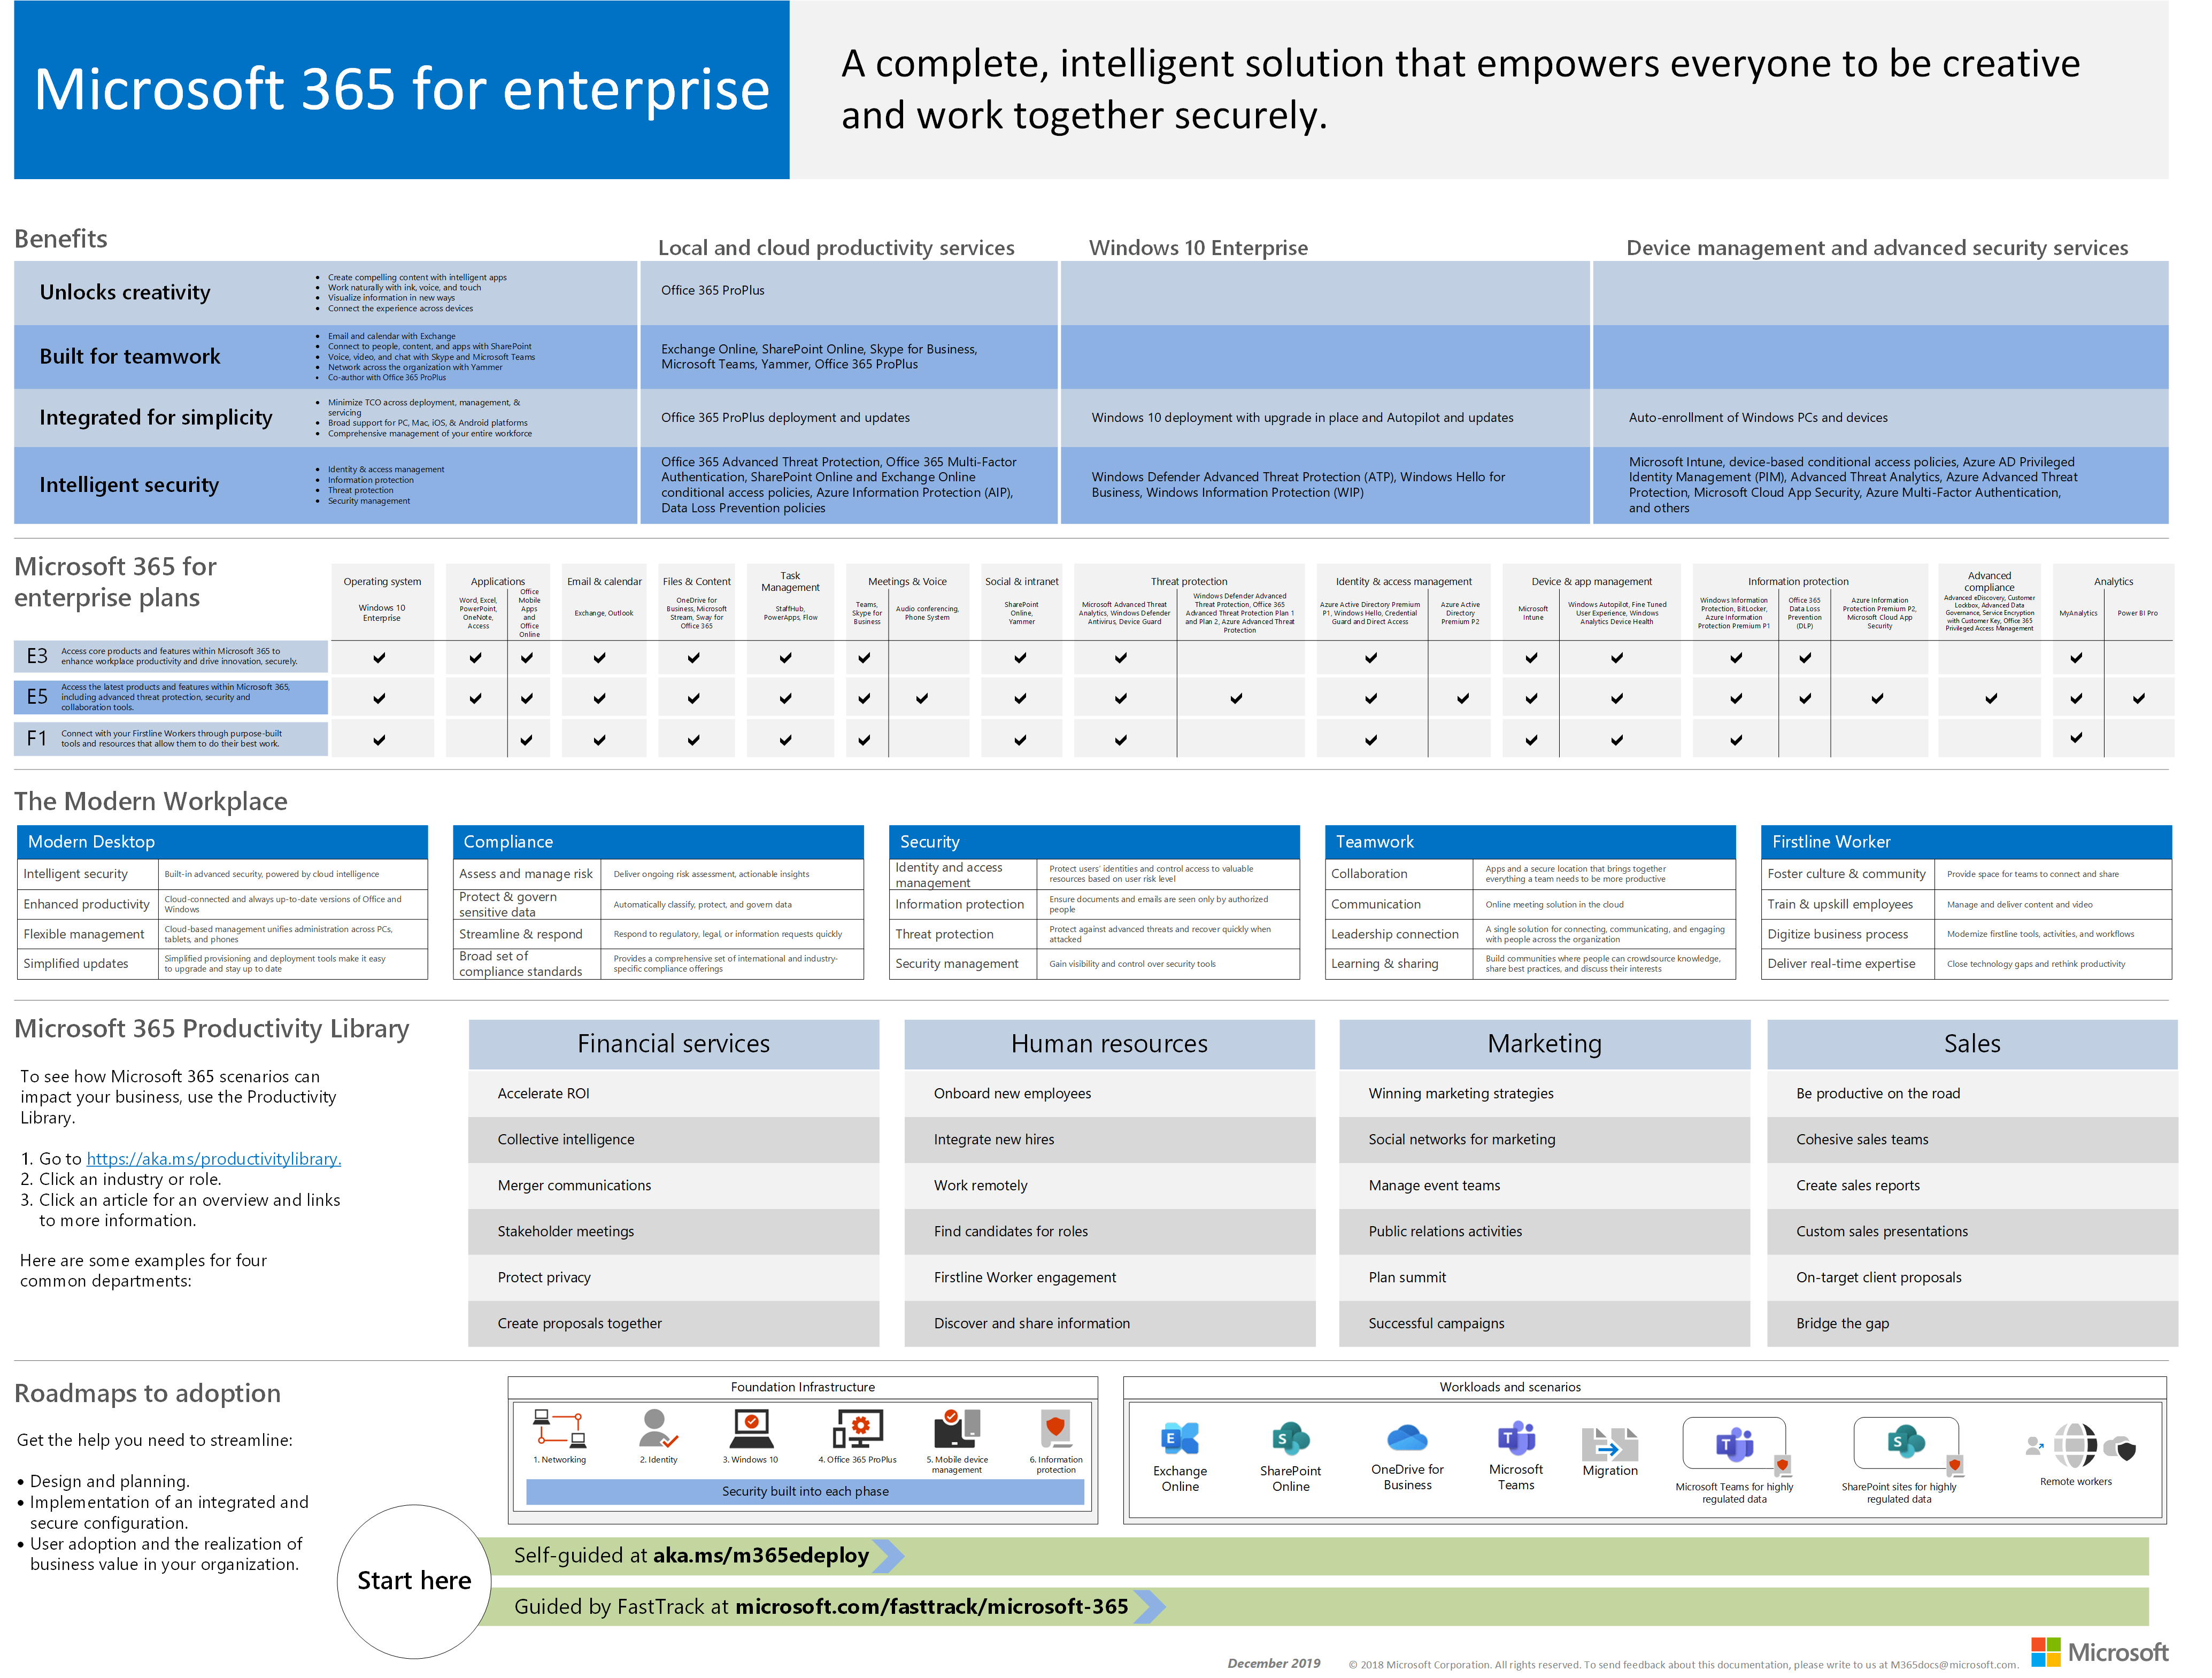 Image for the Microsoft 365 for enterprise poster